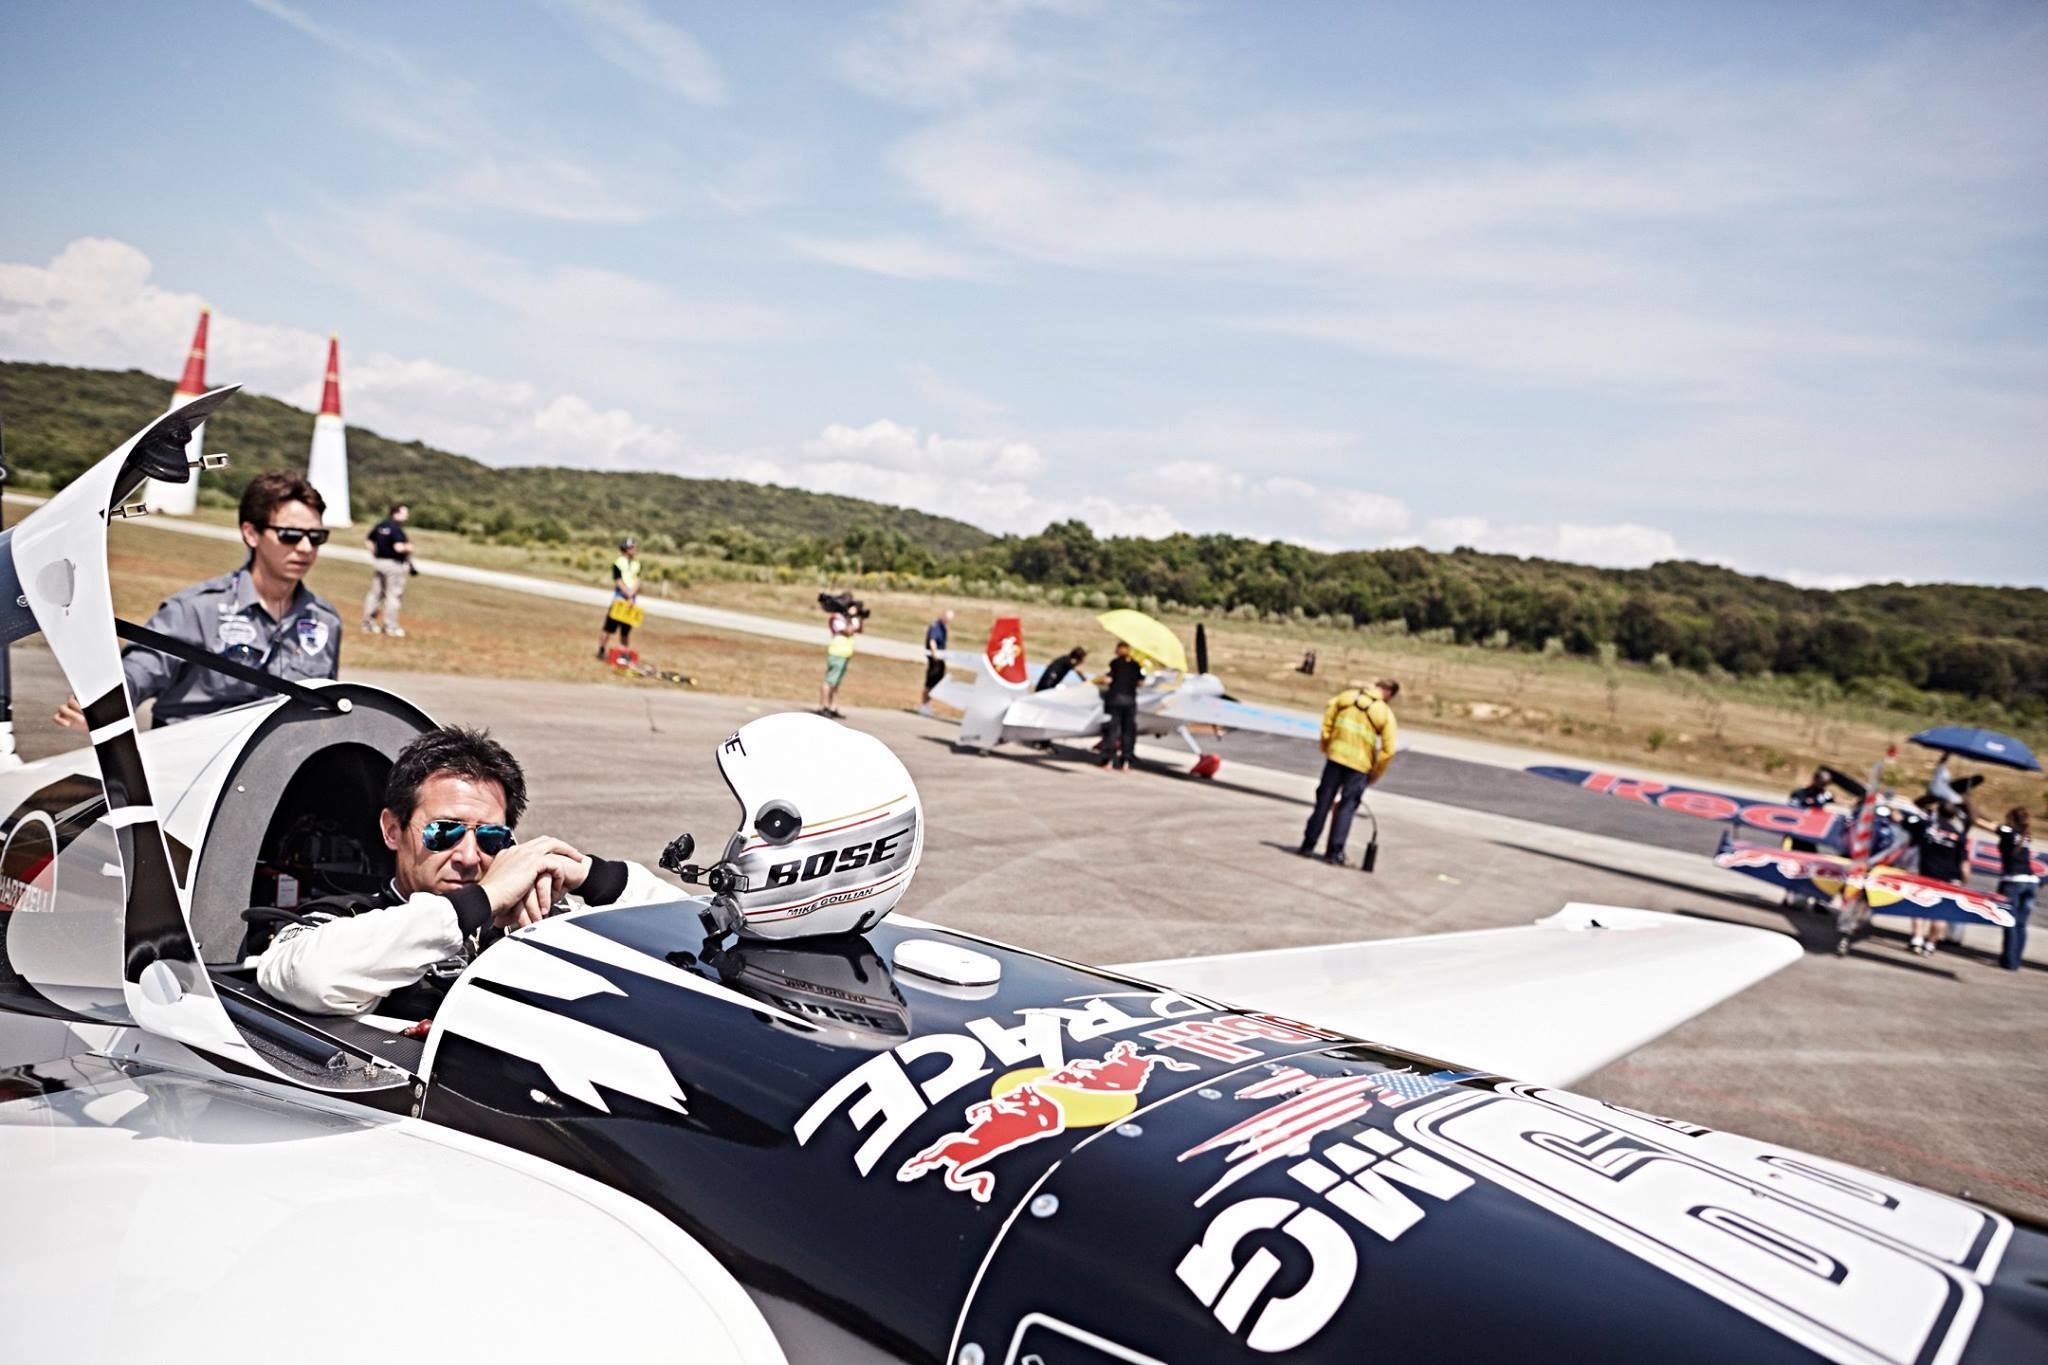 What It’s Like to Be a Red Bull Air Race Pilot